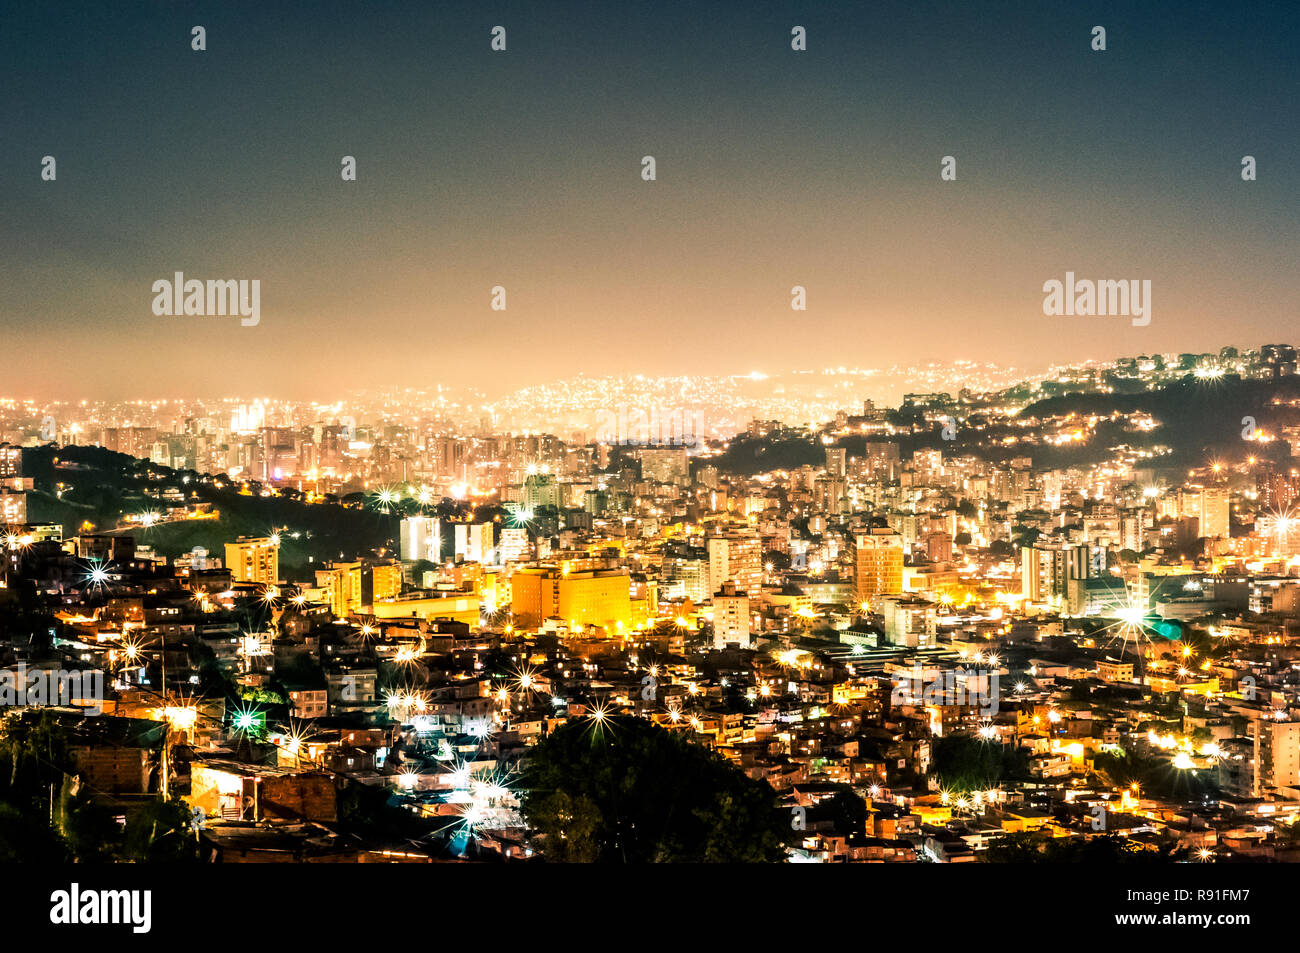 night view cityscape of caracas during summer clear sky with view of hills with the slums, so called barrios Stock Photo